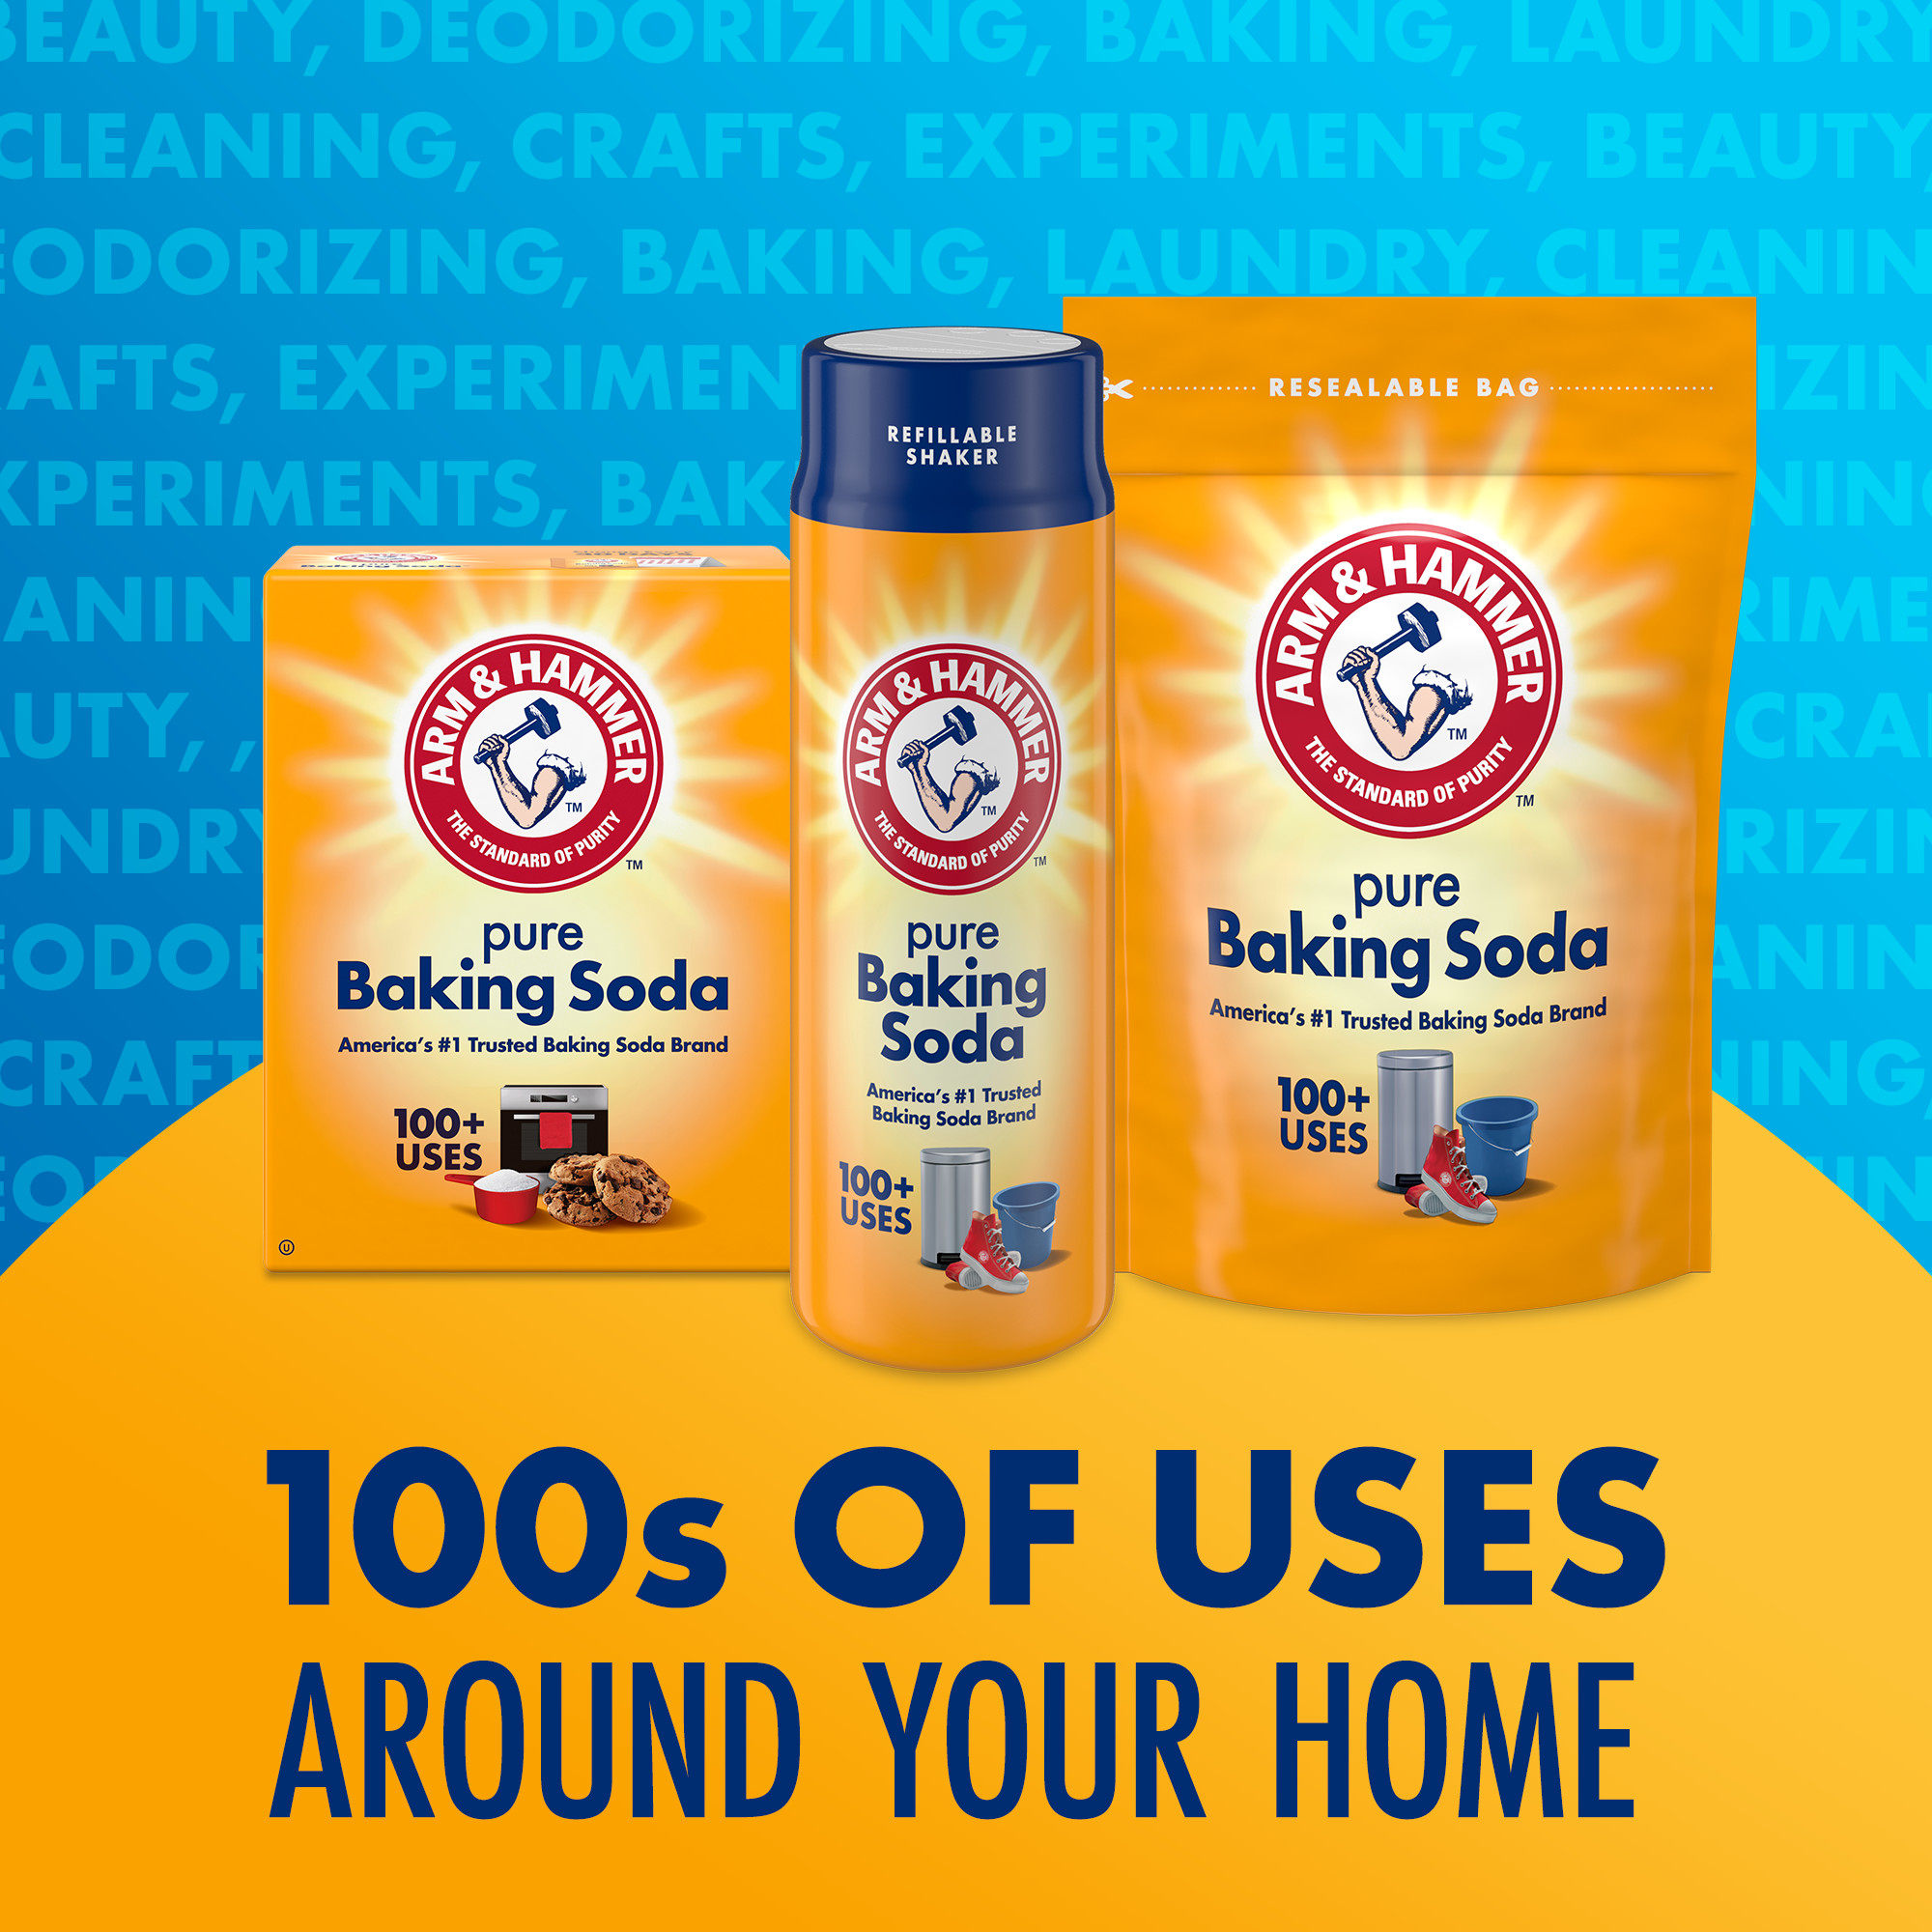 ARM & HAMMER Pure Baking Soda, For Baking, Cleaning & Deodorizing, 5 lb Bag - image 4 of 15